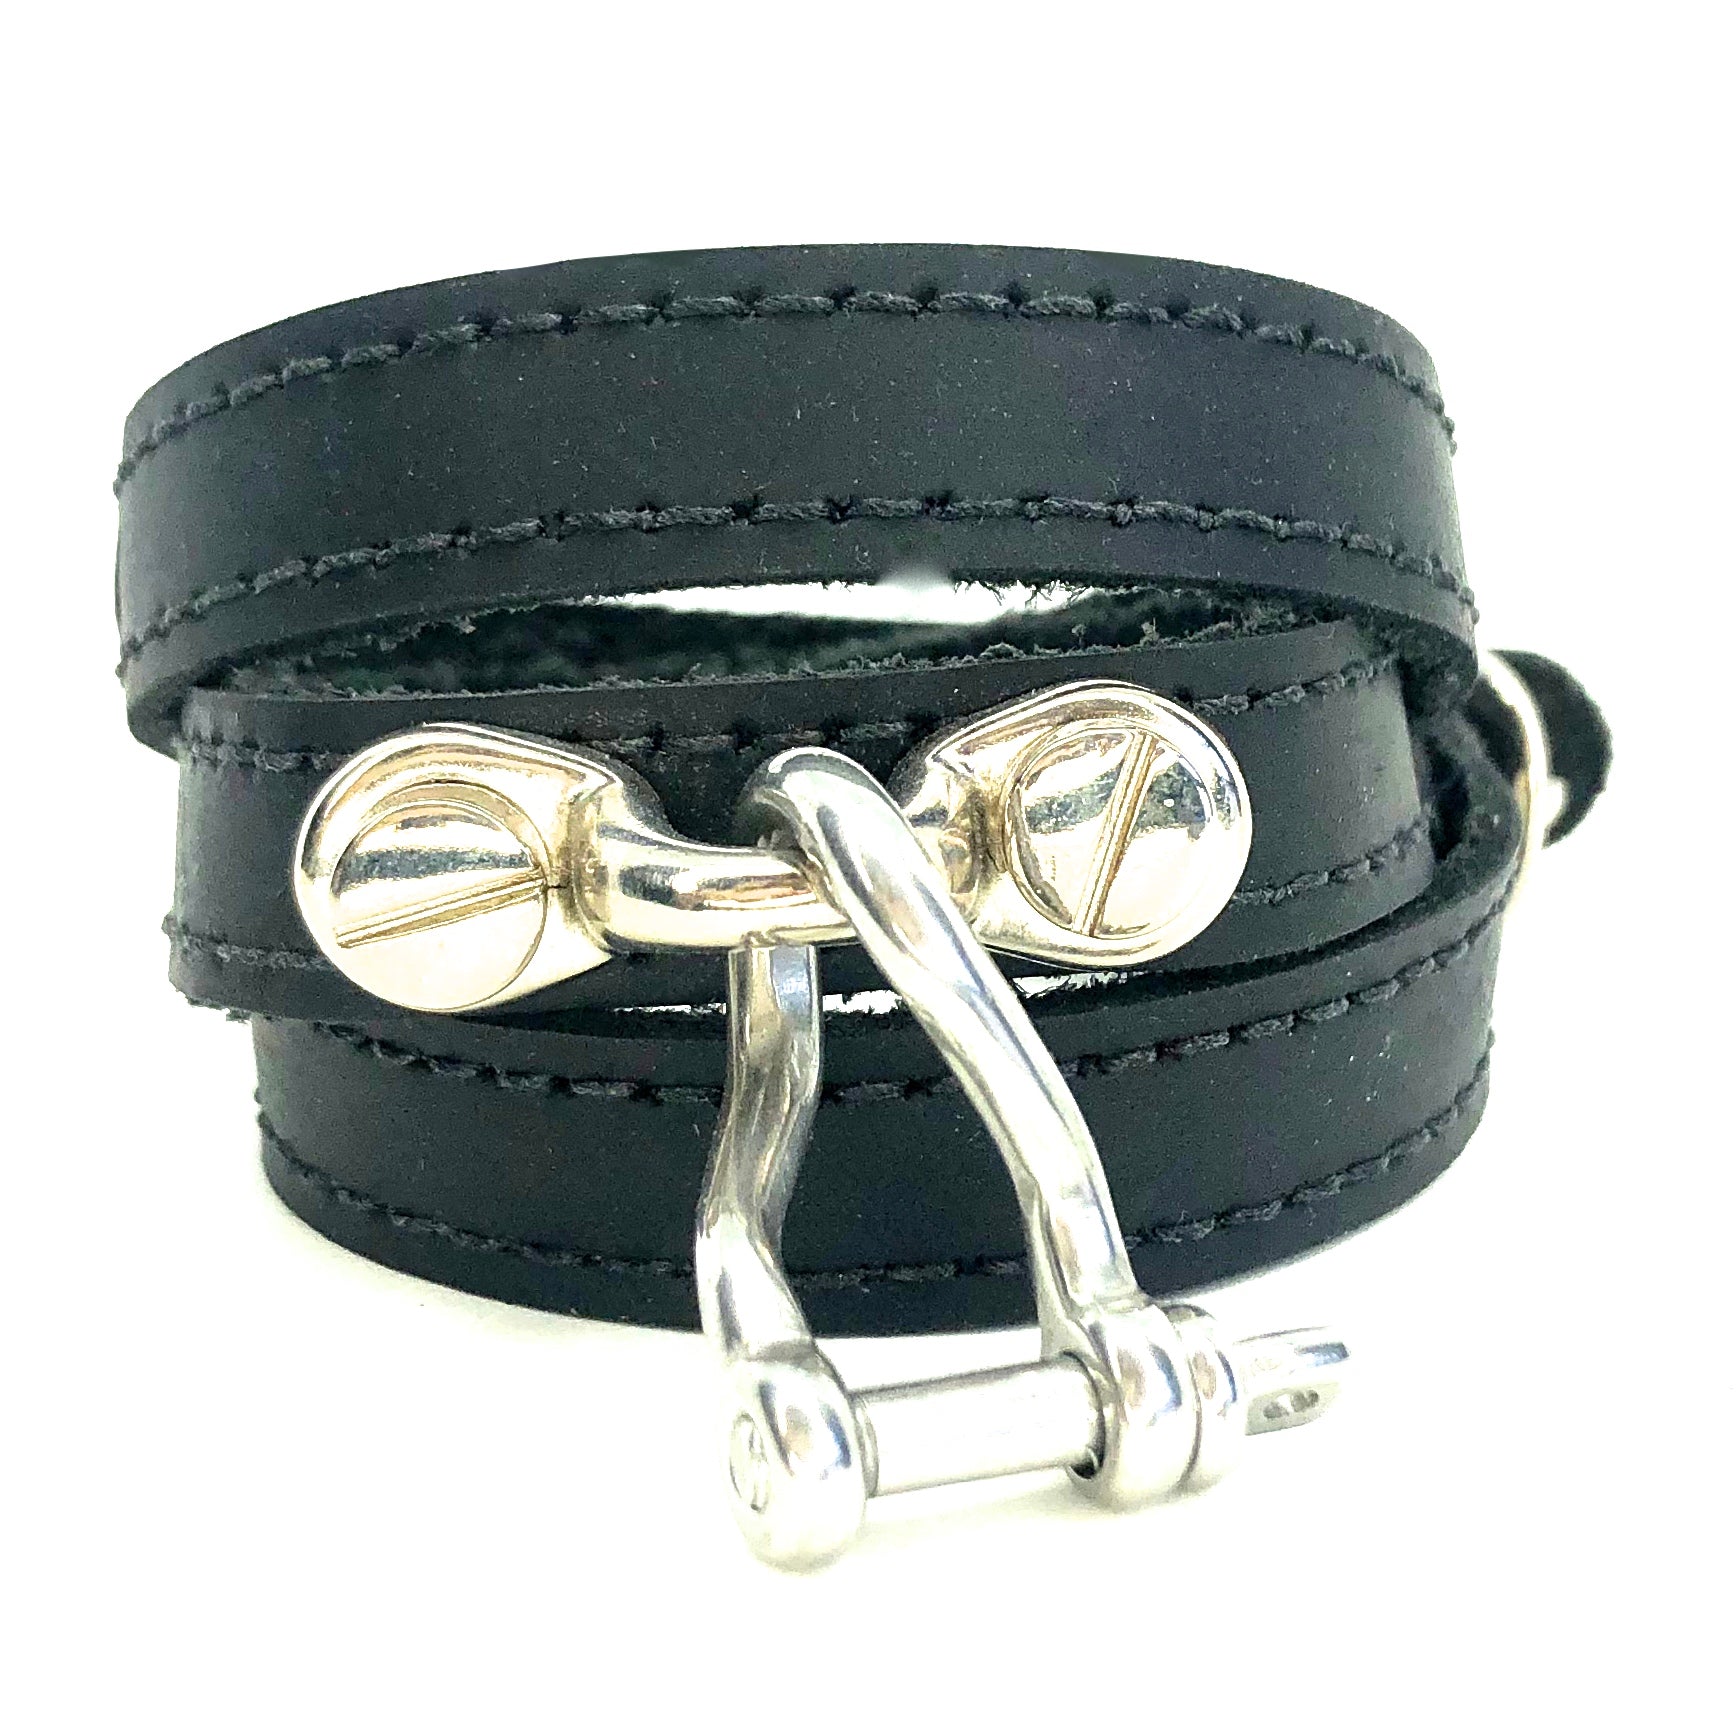 TRIPLE WRAPAROUND LEATHER BRACELET WITH COACHMAN LOOP AND TWISTED ANCHOR SHACKLE  by NYET Jewelry.